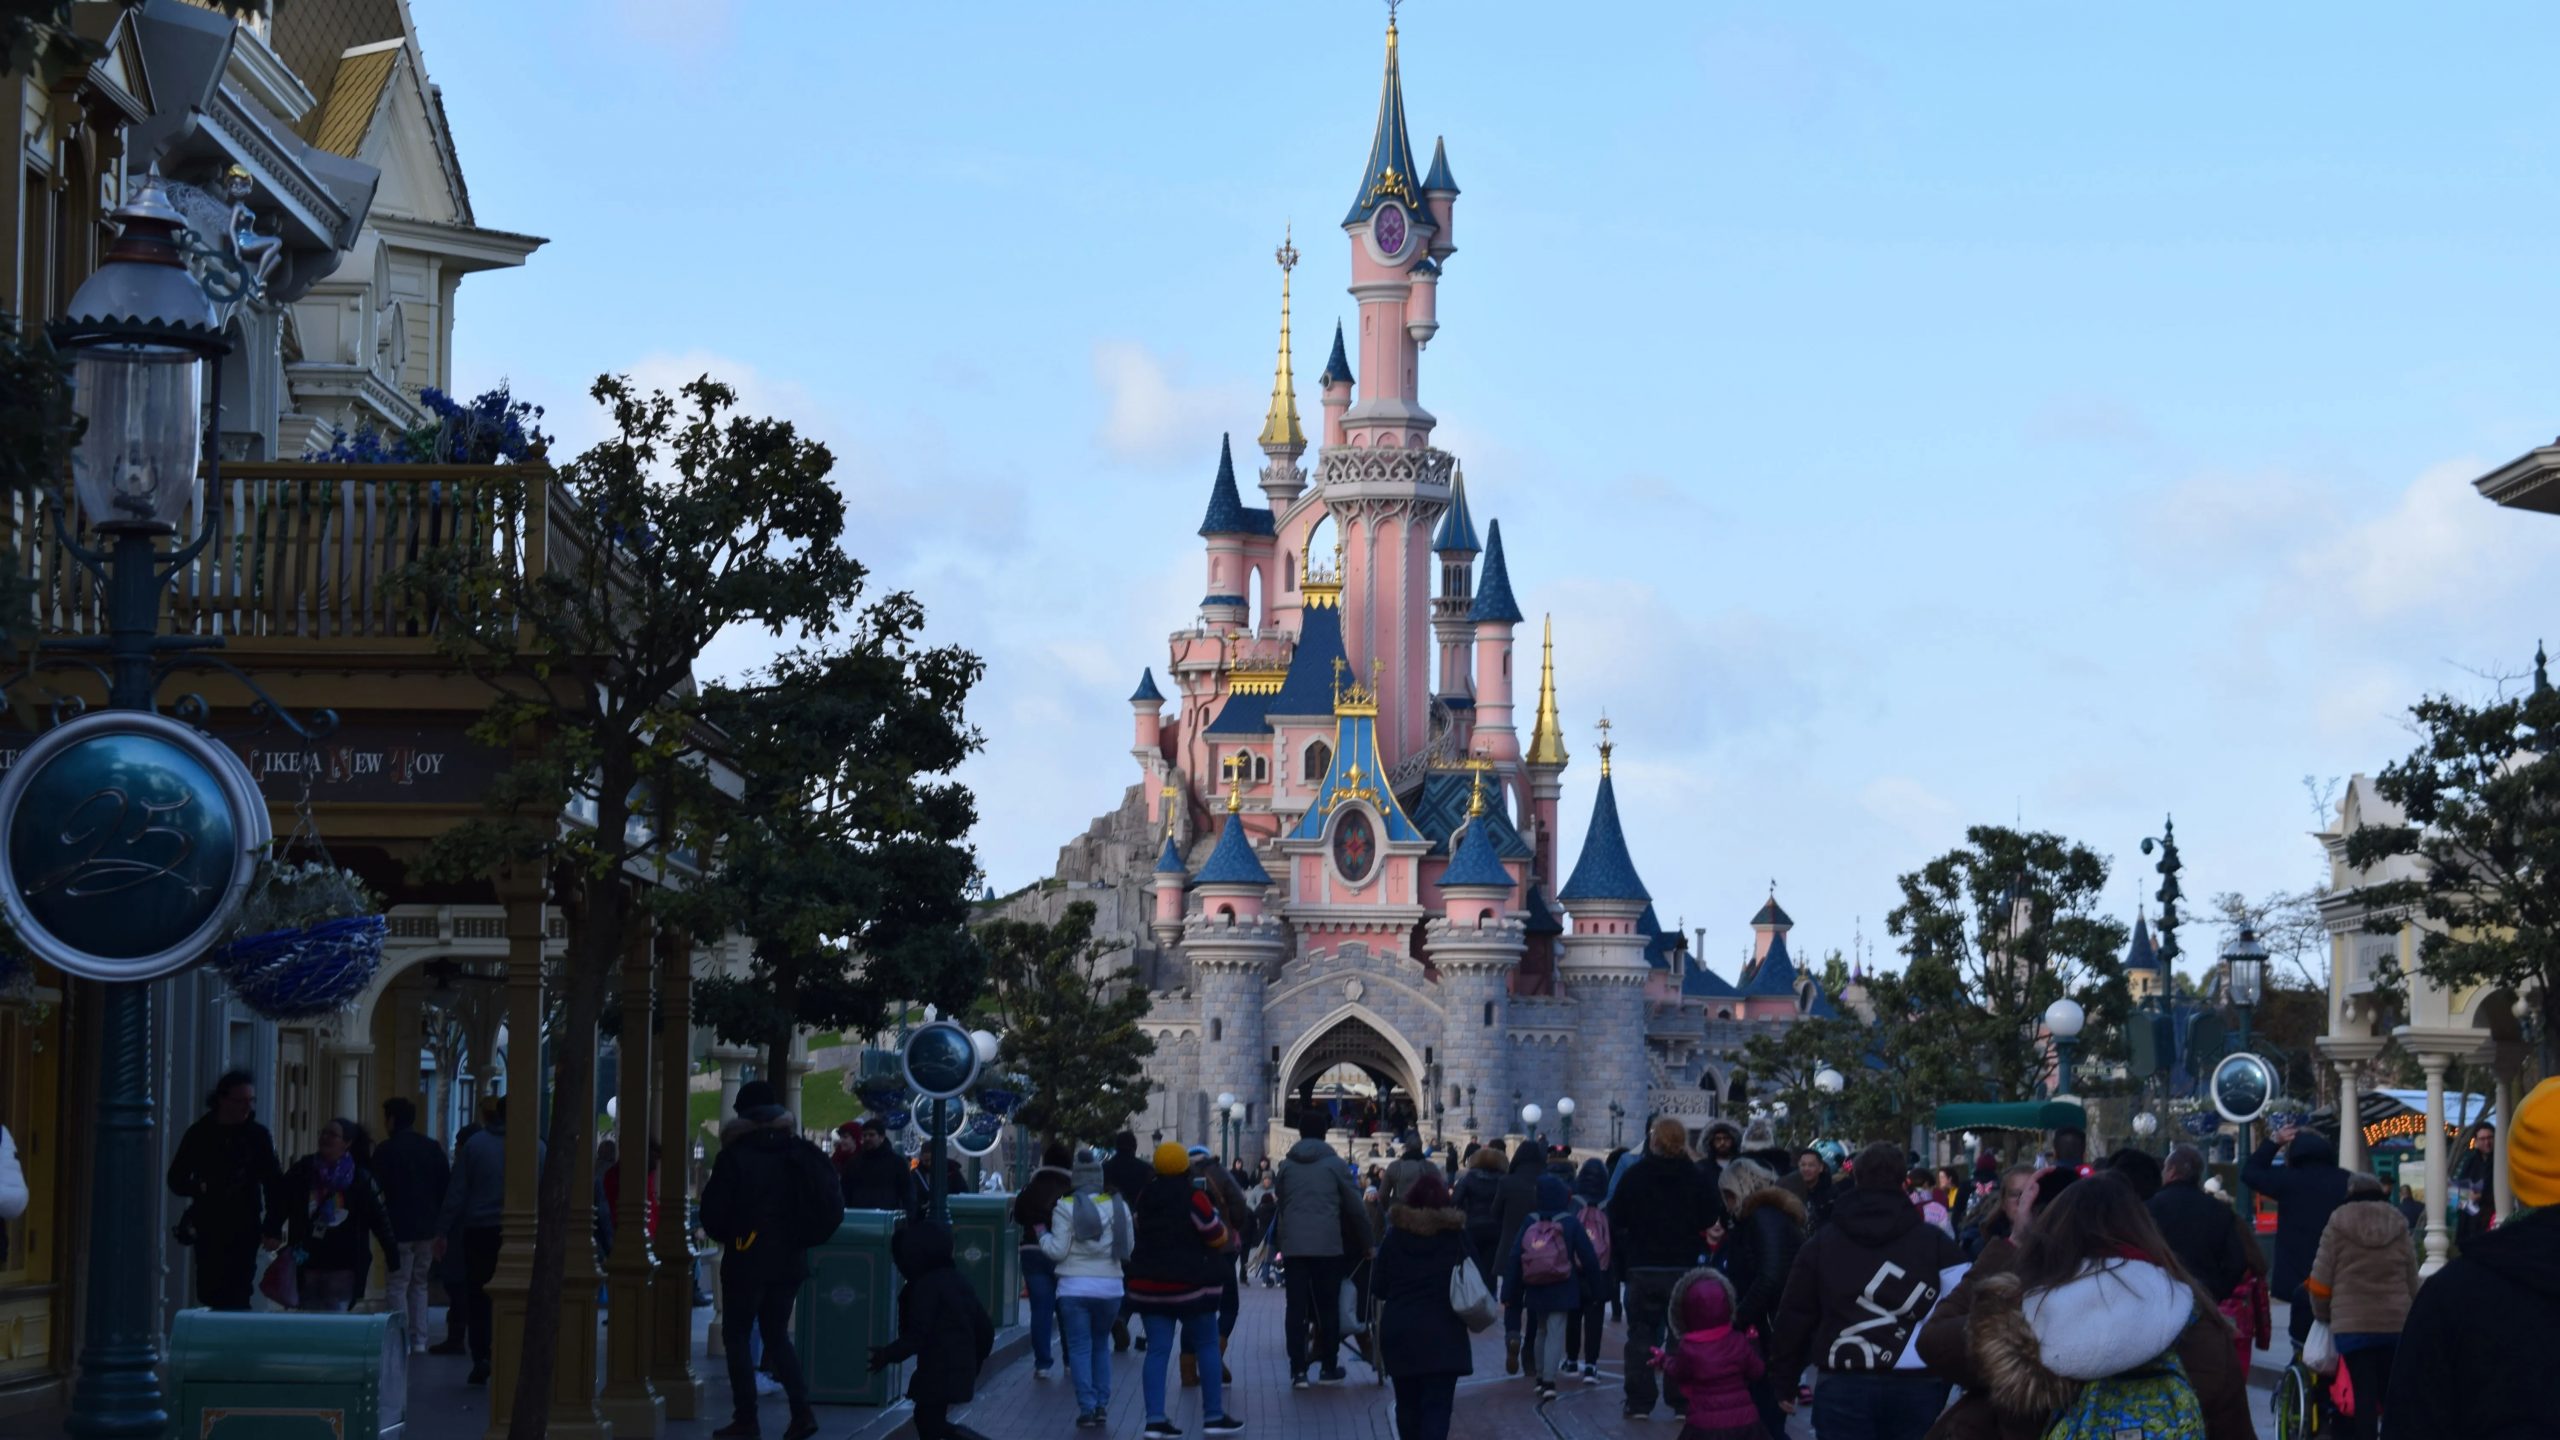 25,000 employees sue Disneyland over living wage issues: Report